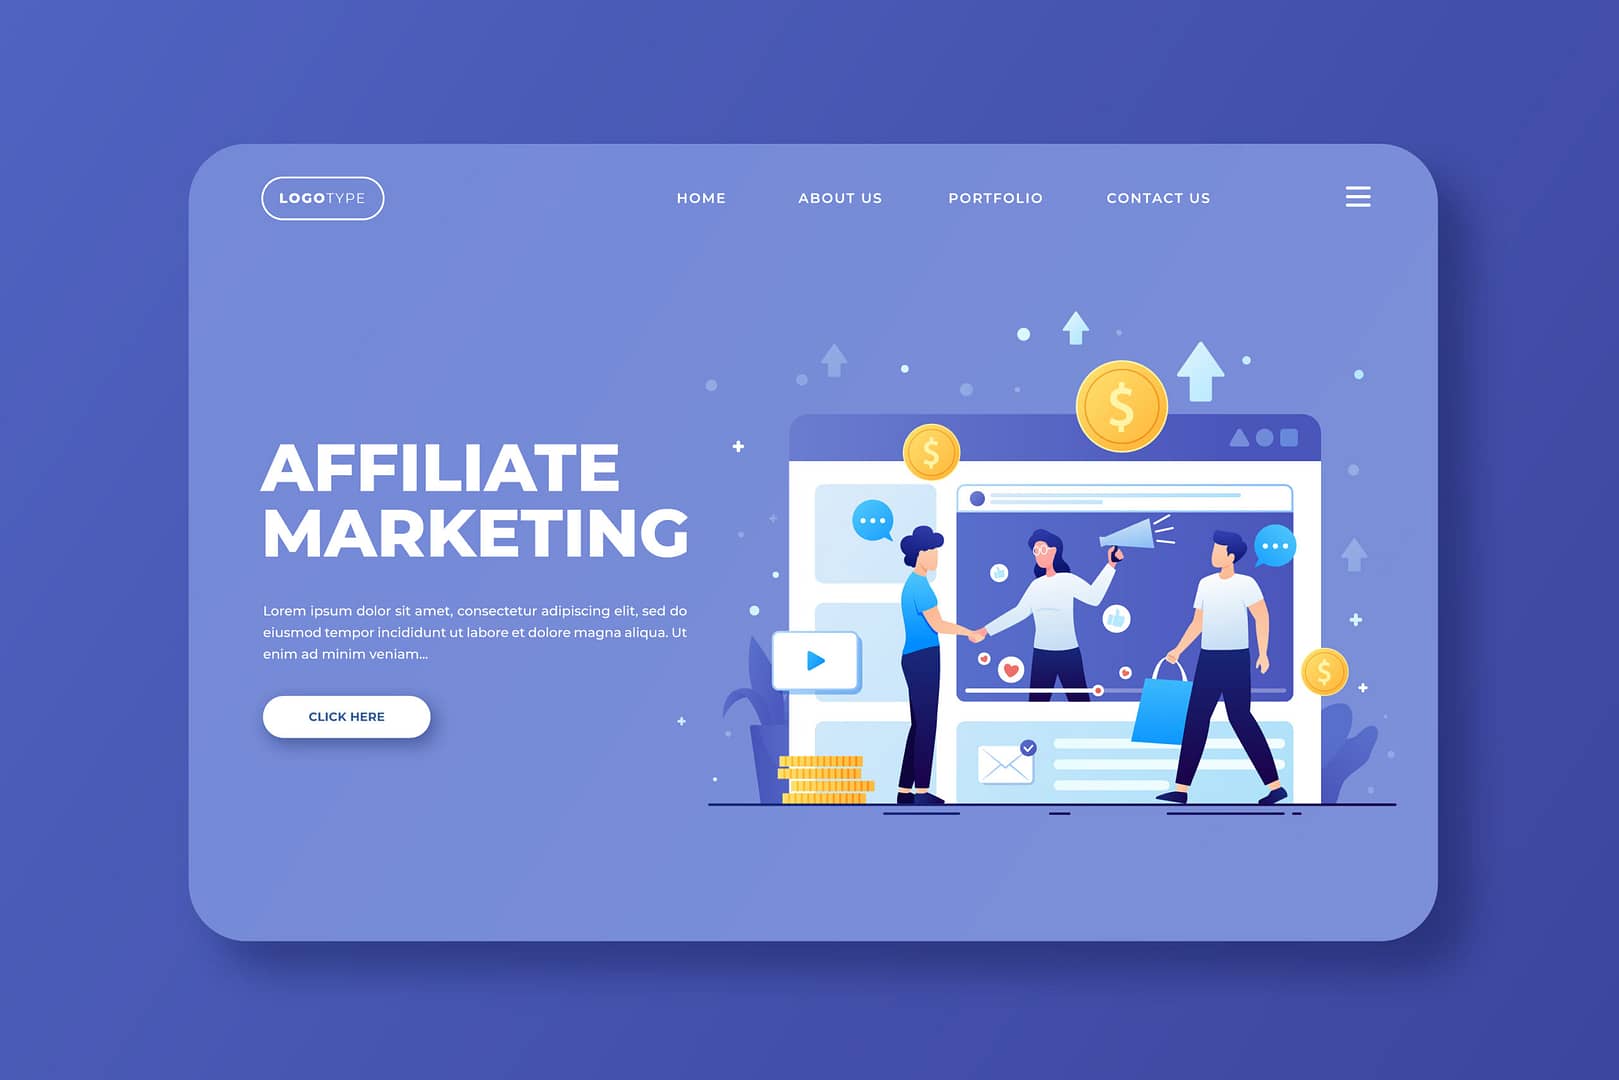 Getting started with Affliate Marketing